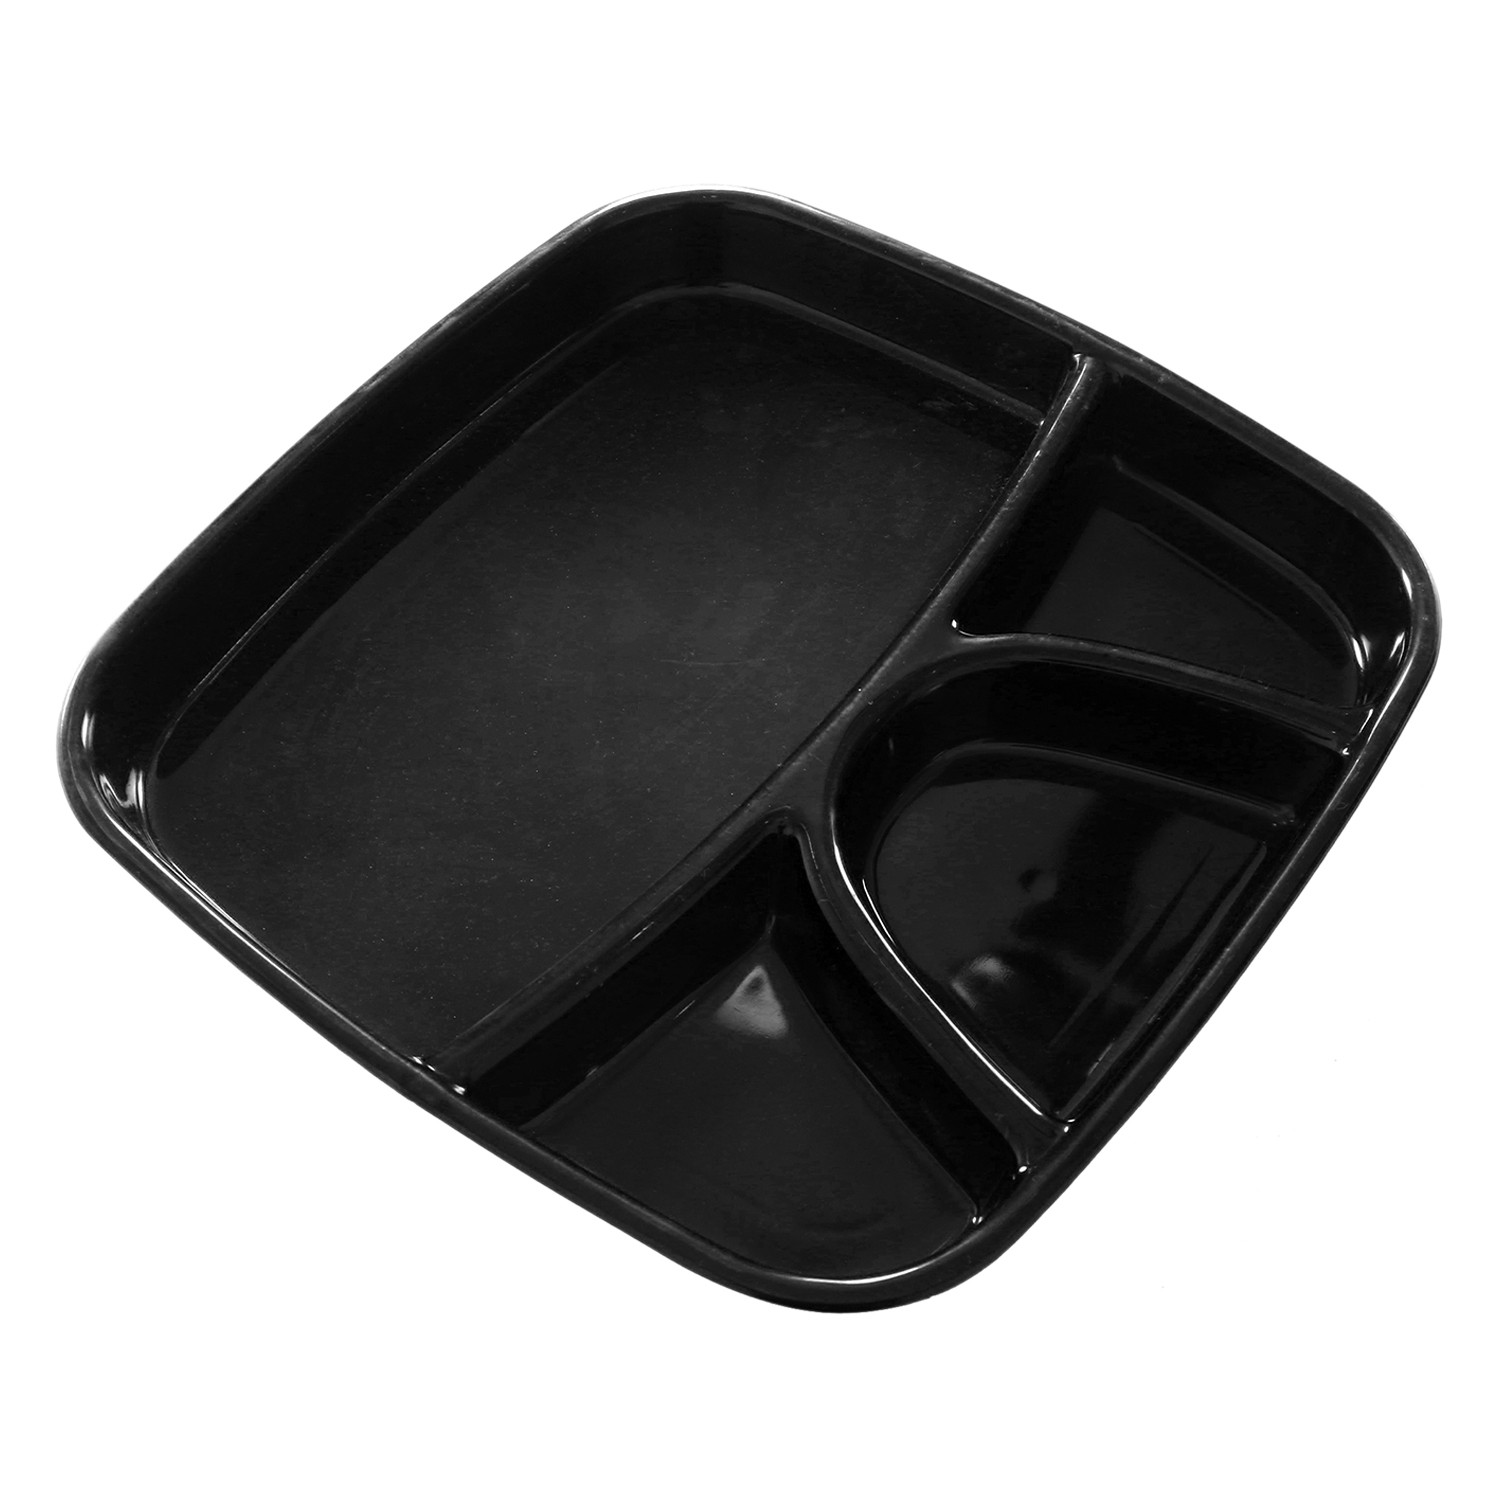 Kuber Industries Serving Plate|Plate Set For Dinner|Unbreakable Plastic Plates|Microwave Safe Plates|Food Organizer With 4 Partitions(Black & Brown)